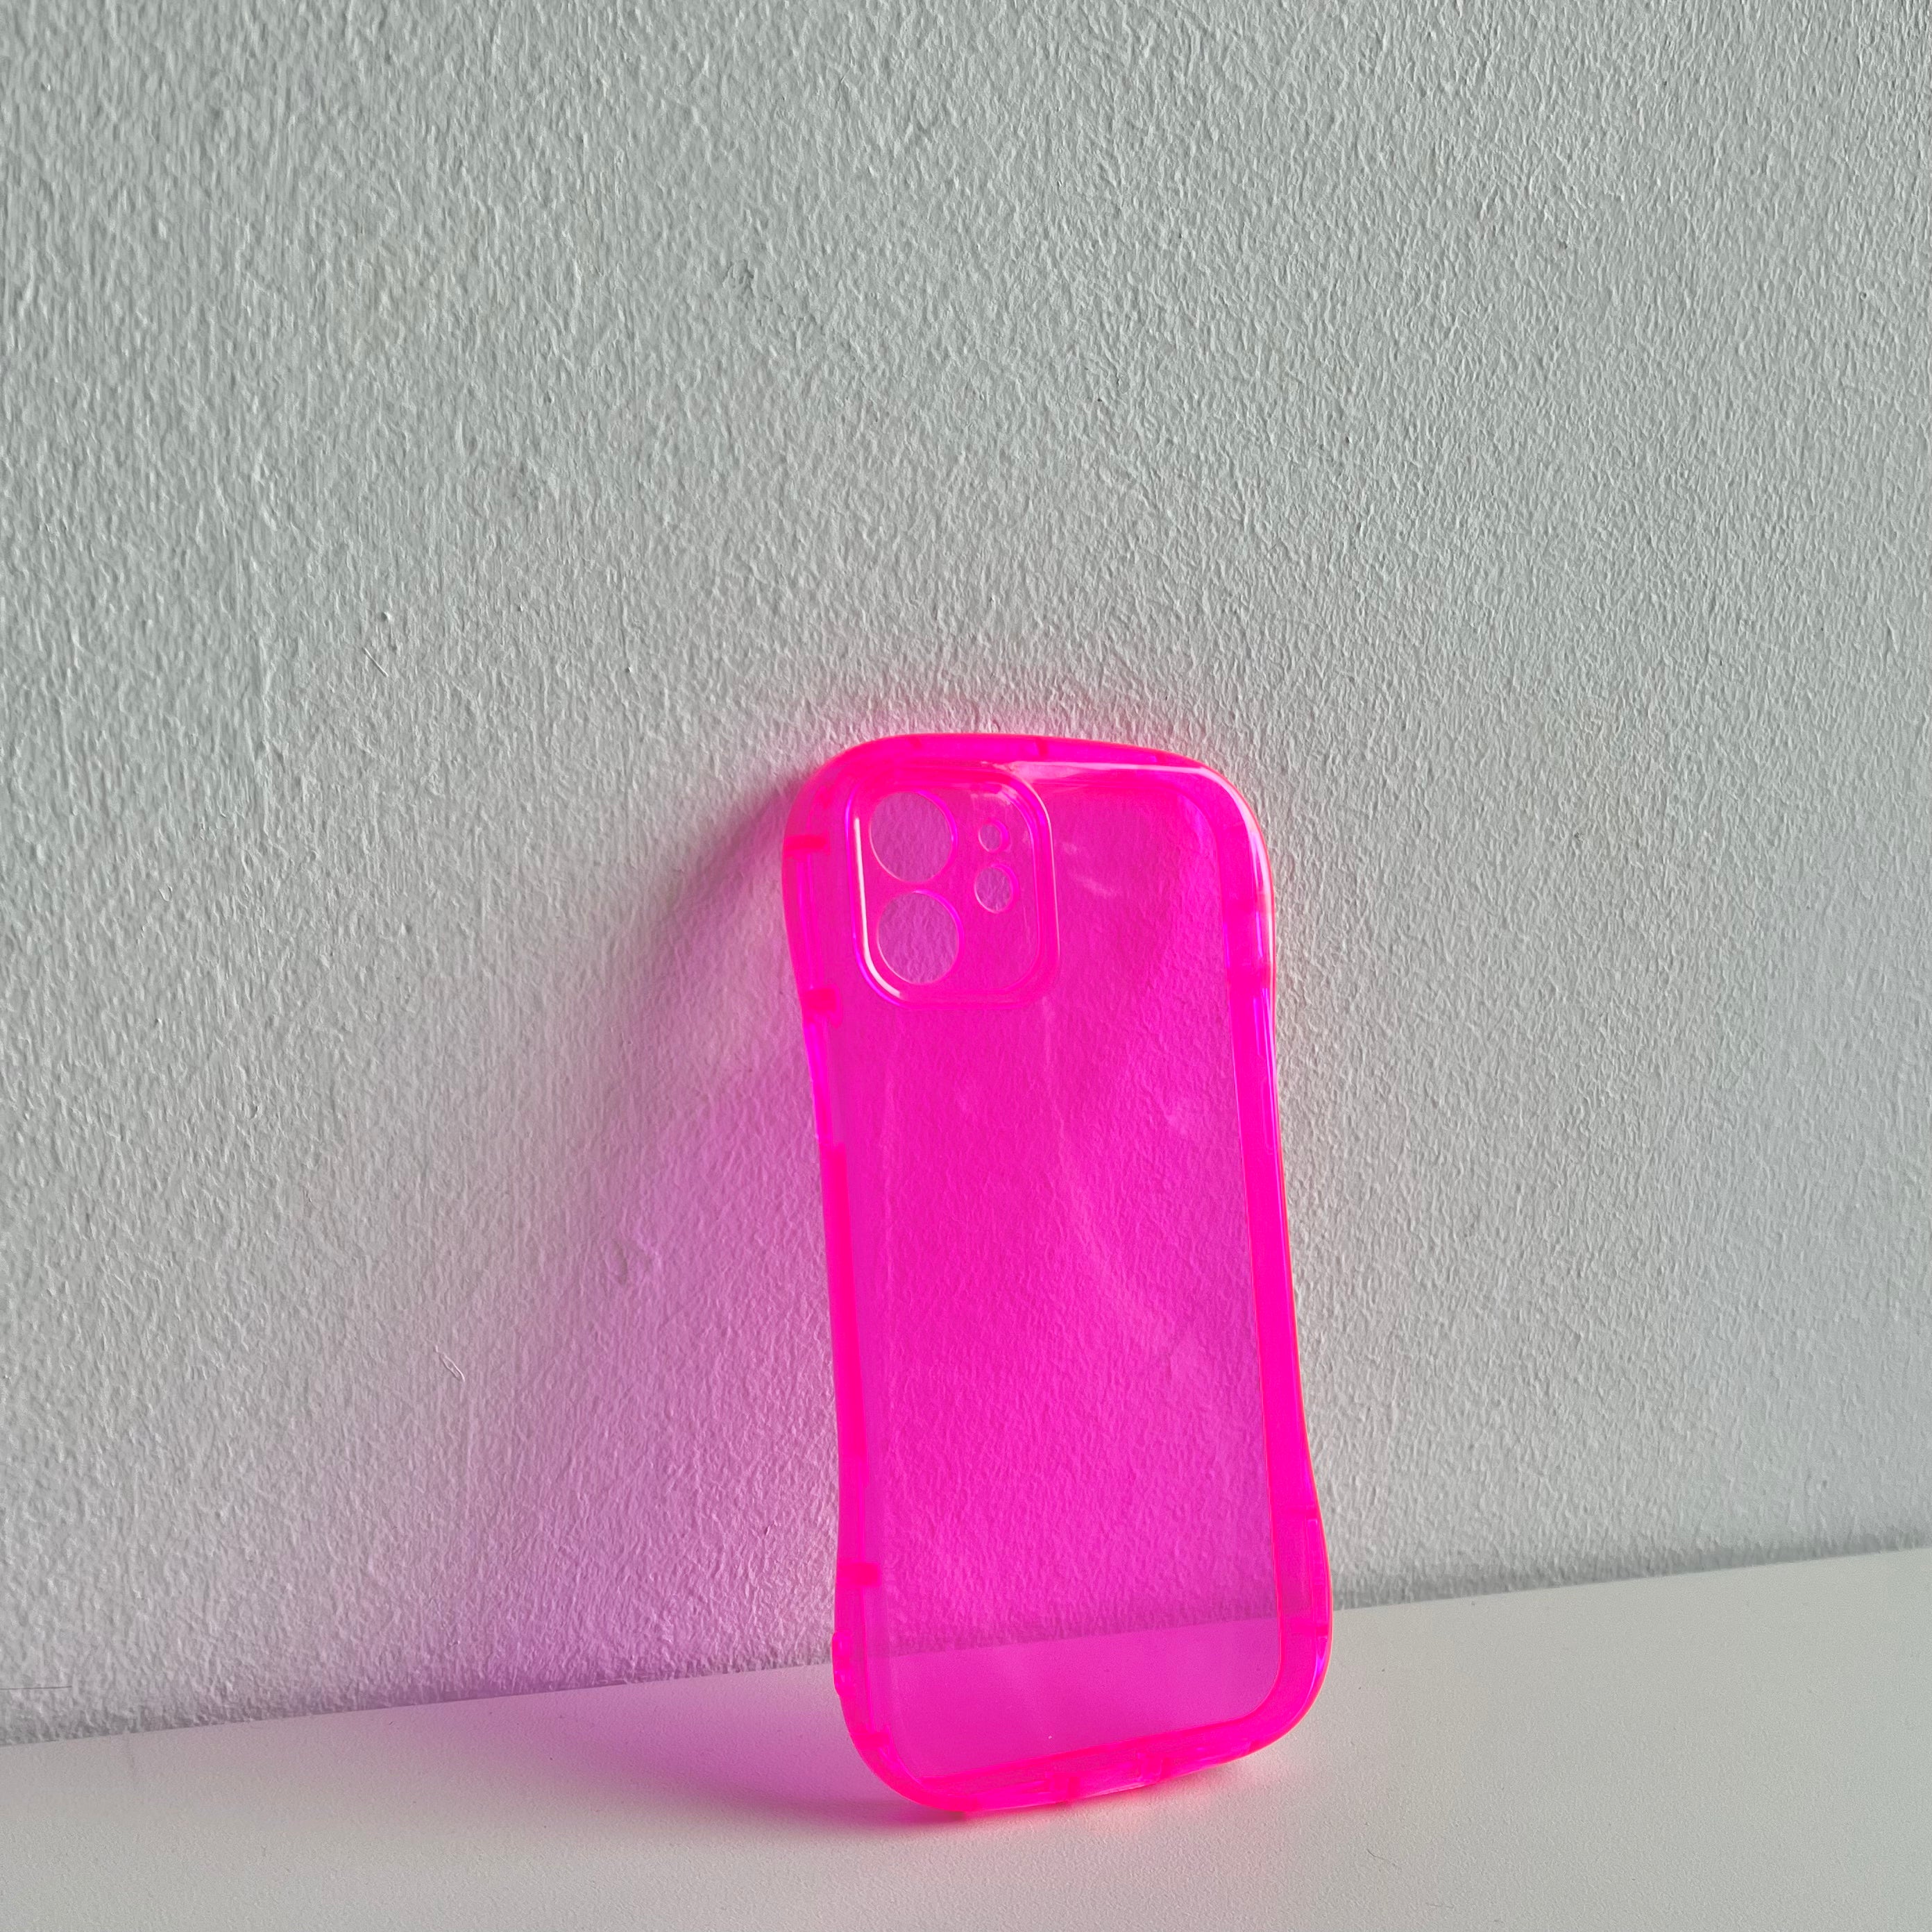 Neon Pink Jelly iPhone Case by Veronique